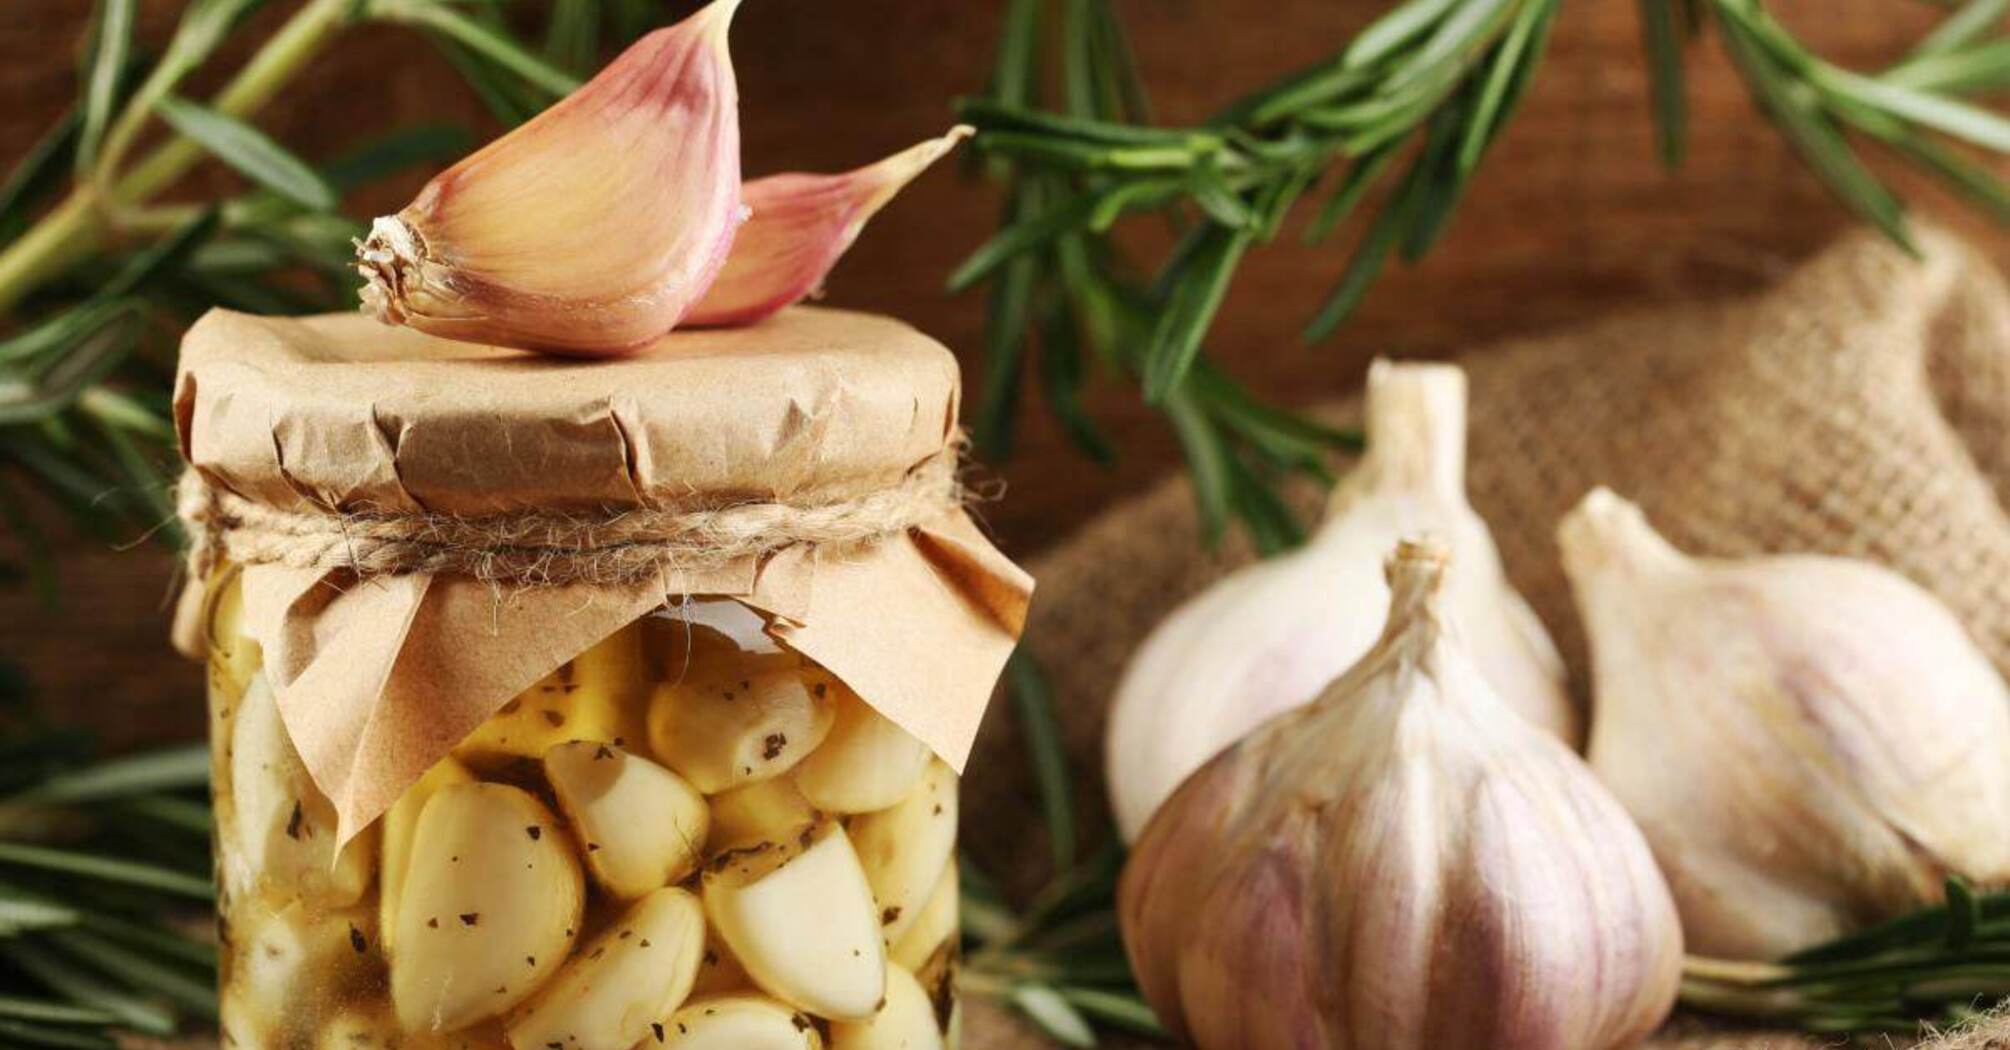 How to store garlic properly to keep it fresh for as long as possible